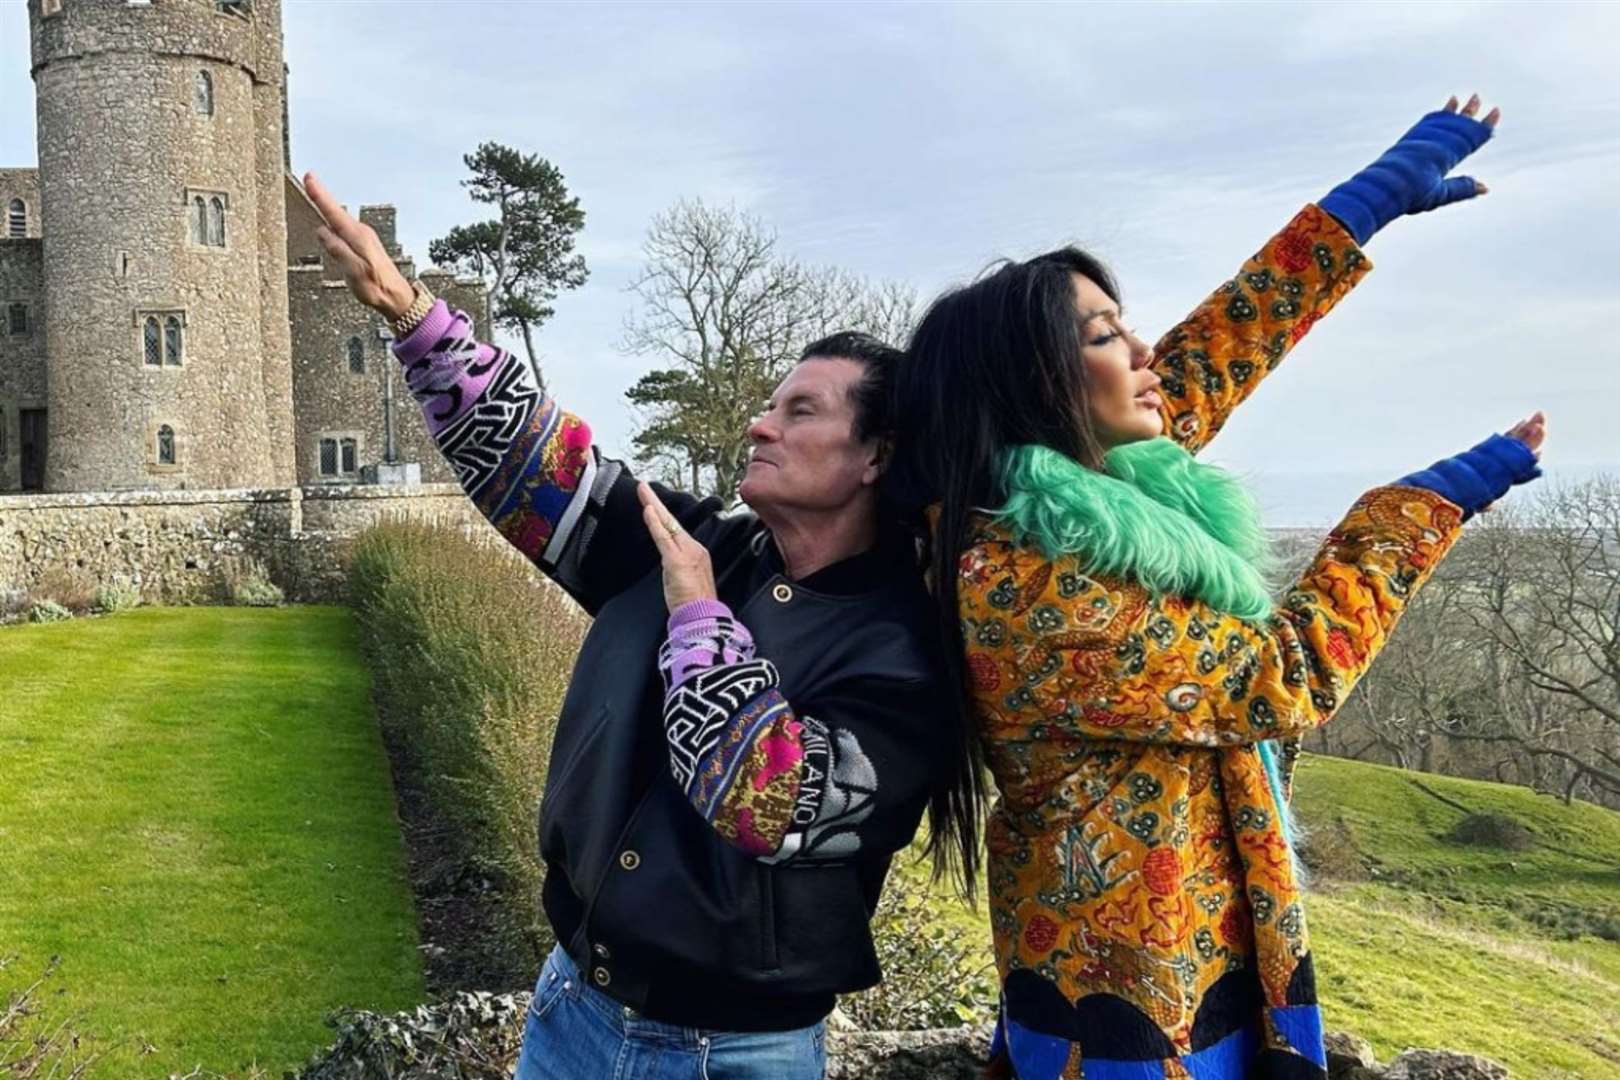 On February 2 the couple posed in front of the castle saying "House hunting in England". Picture: Instagram